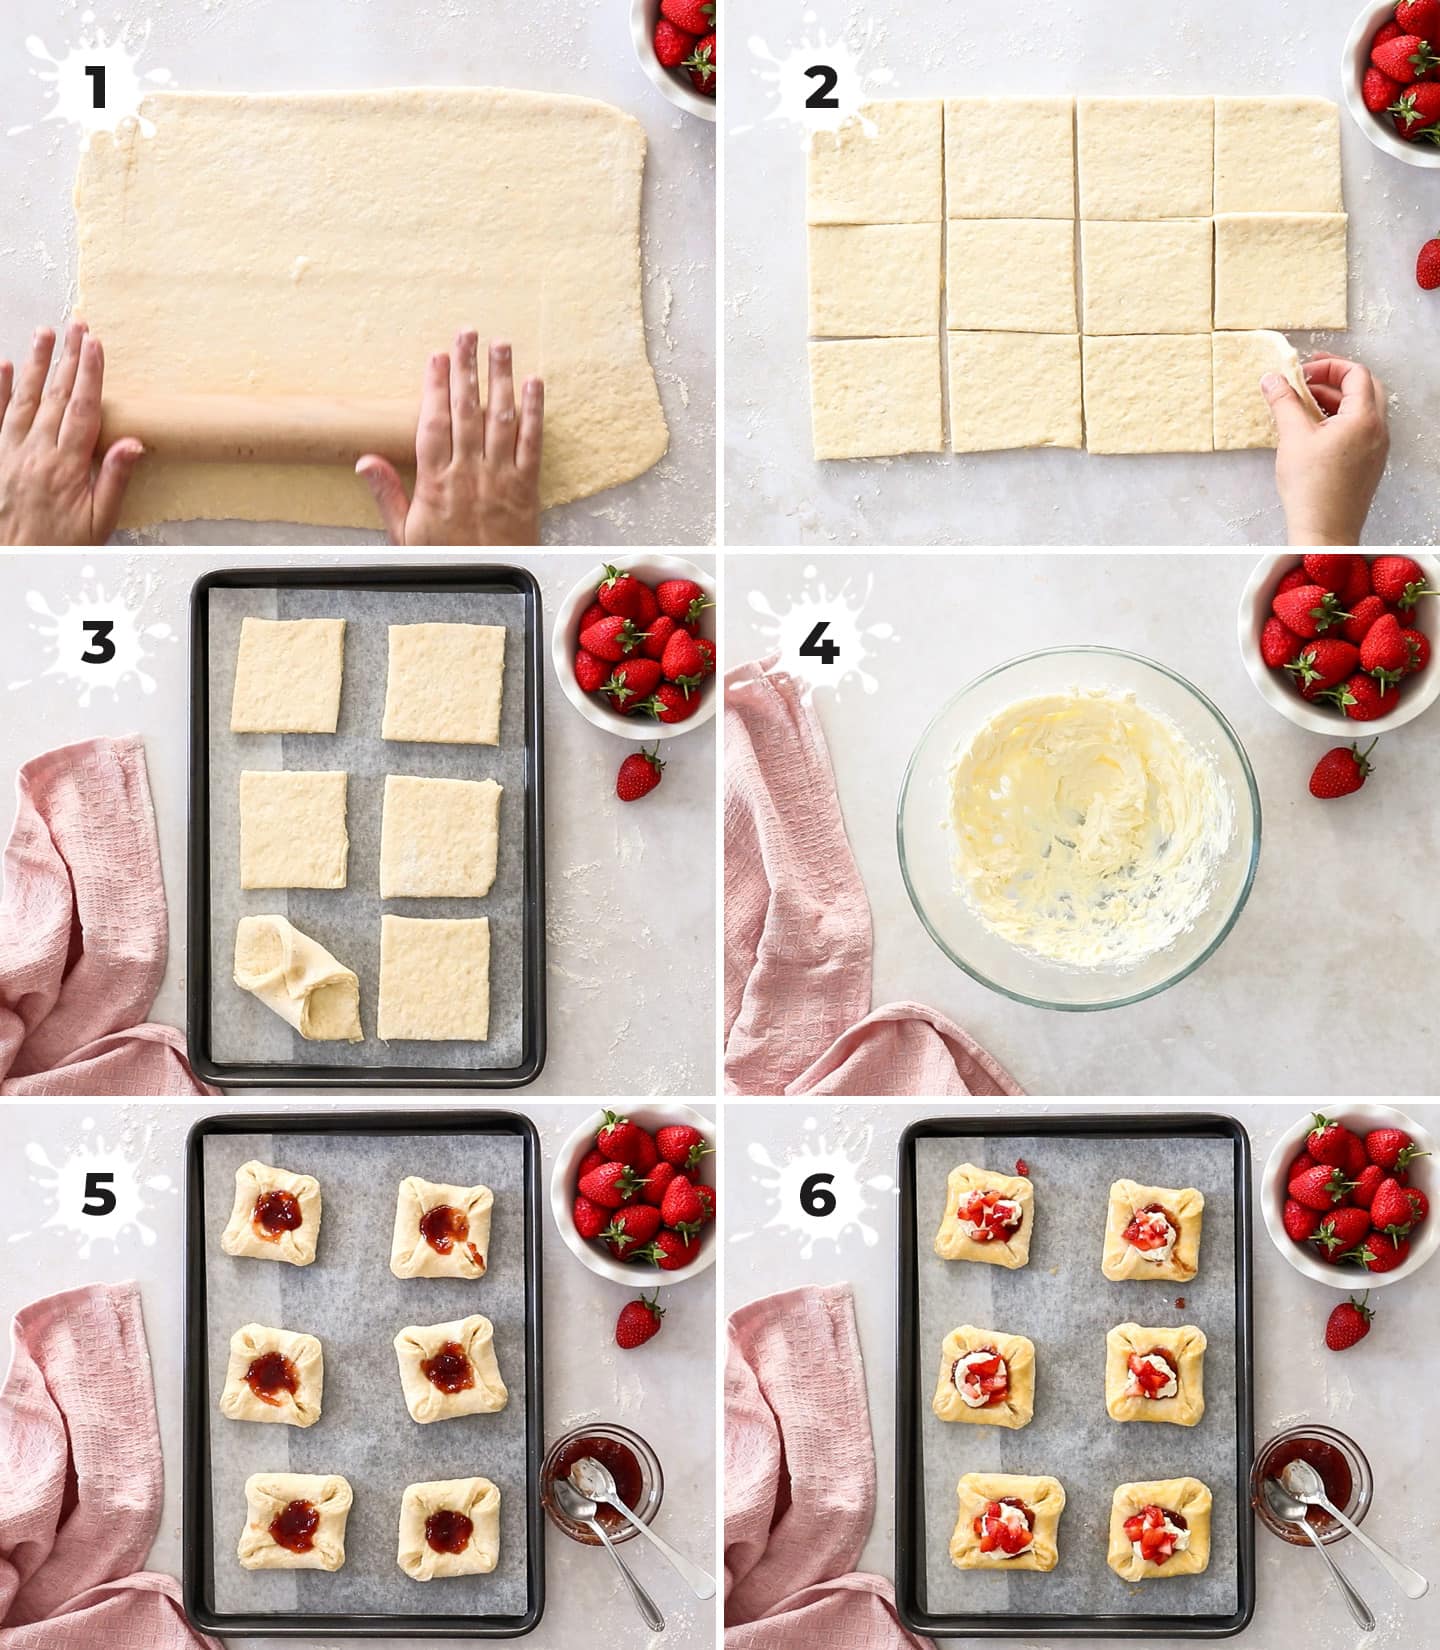 A collage of 6 images showing how to assemble the strawberry Danishes.